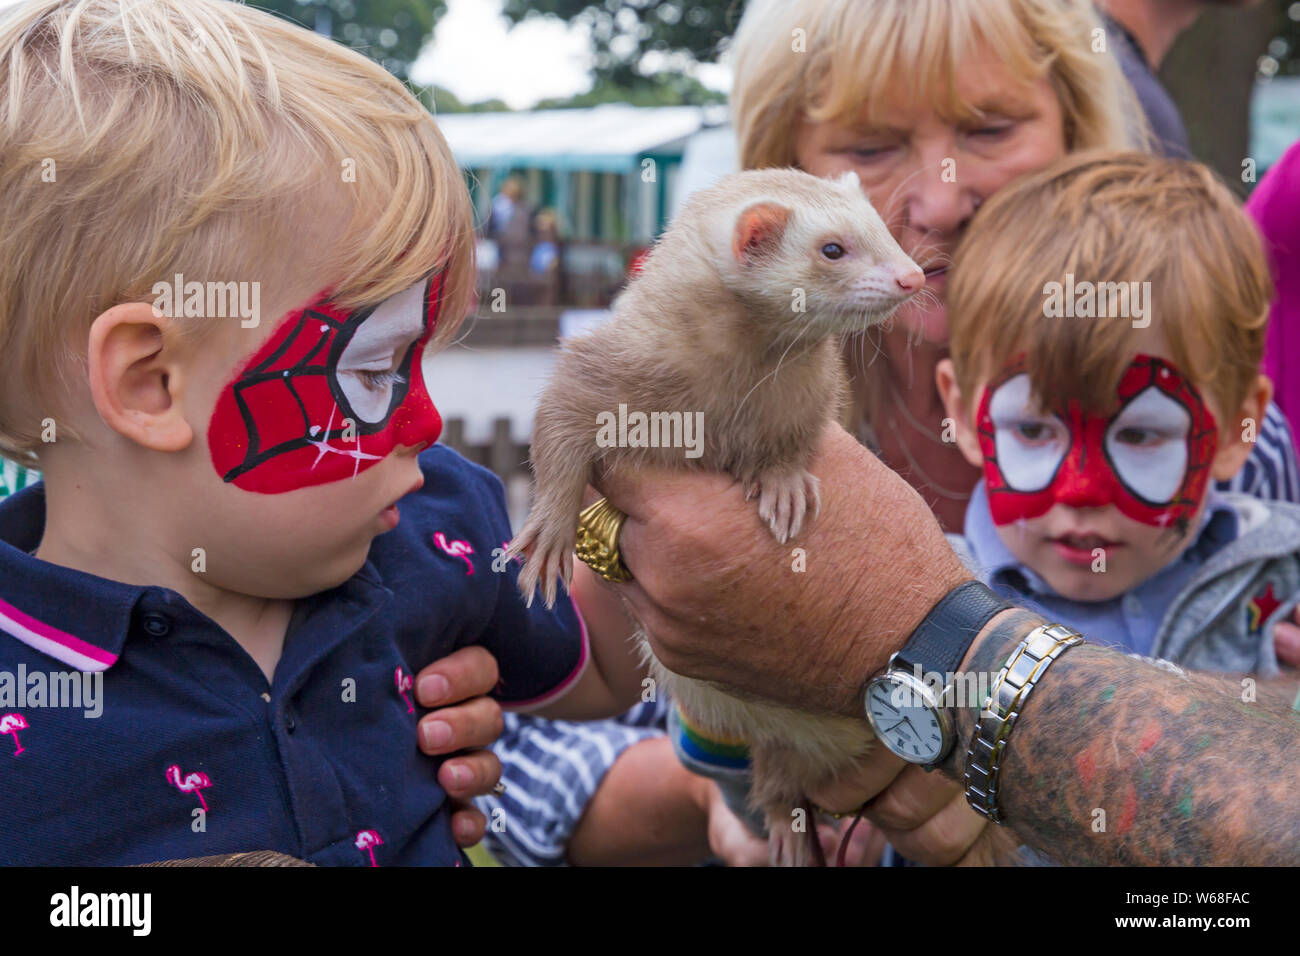 Brockenhurst, Hampshire, UK. 31st July 2019. Thousands flock to the second day of the New Forest & Hampshire County Show.  Kids meet the ferrets before the ferret racing.  Boys with Spider-Man painted face looking at ferret.  Credit: Carolyn Jenkins/Alamy Live News Stock Photo